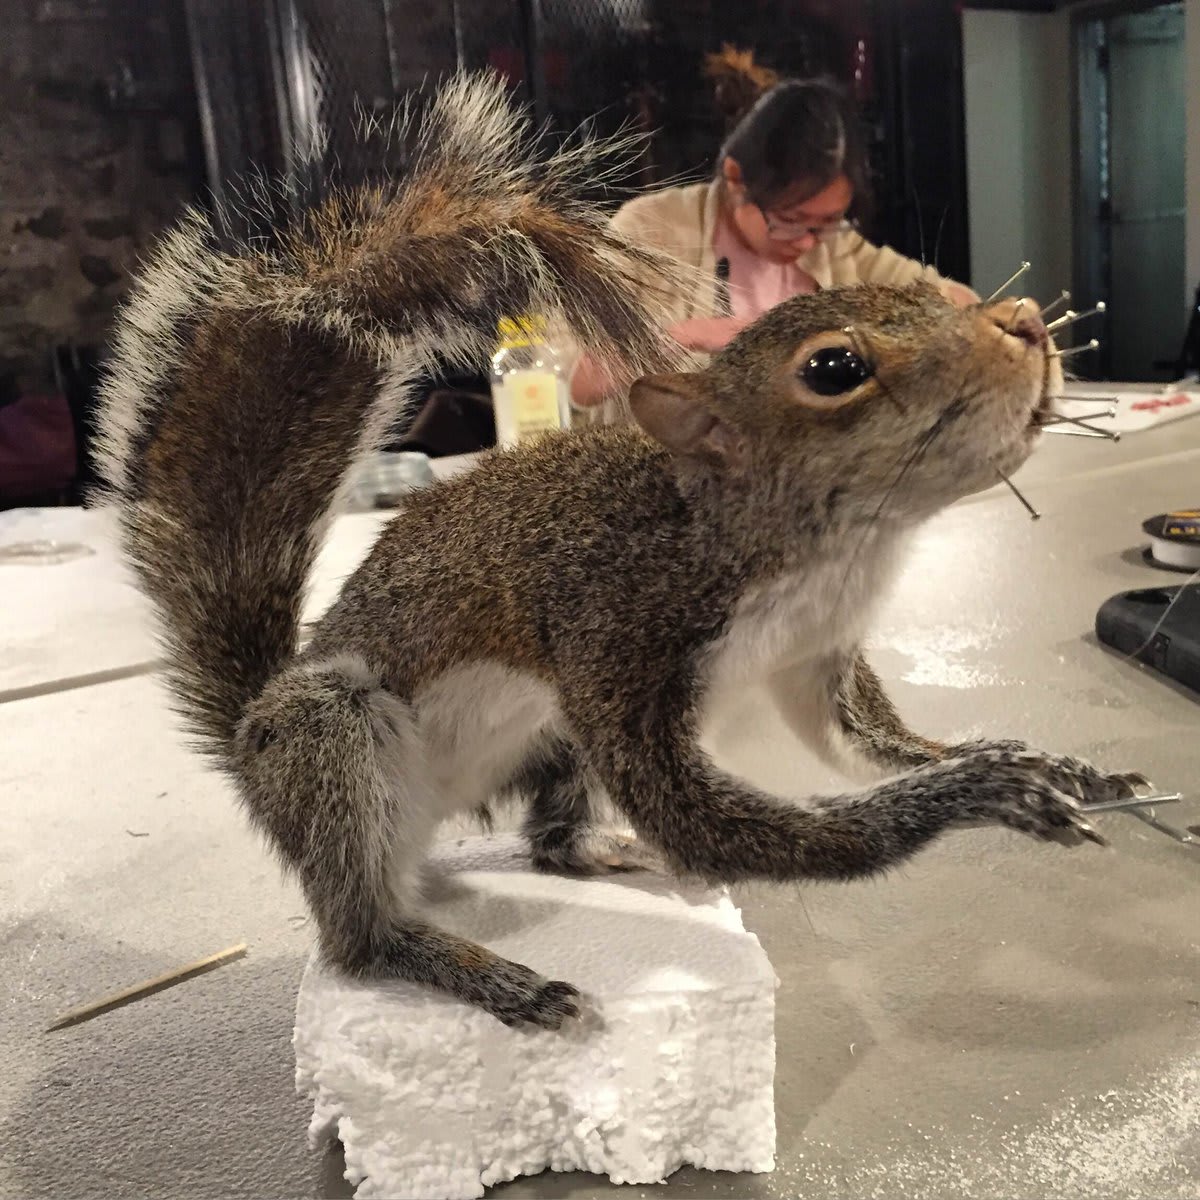 In-person taxidermy classes are back at Morbid Anatomy! Join us at our new home in @IndustryCity and learn to mount birds, mice, and squirrels with award-winning taxidermist and educator Divya Anantharaman in small, socially distanced classes. Register at